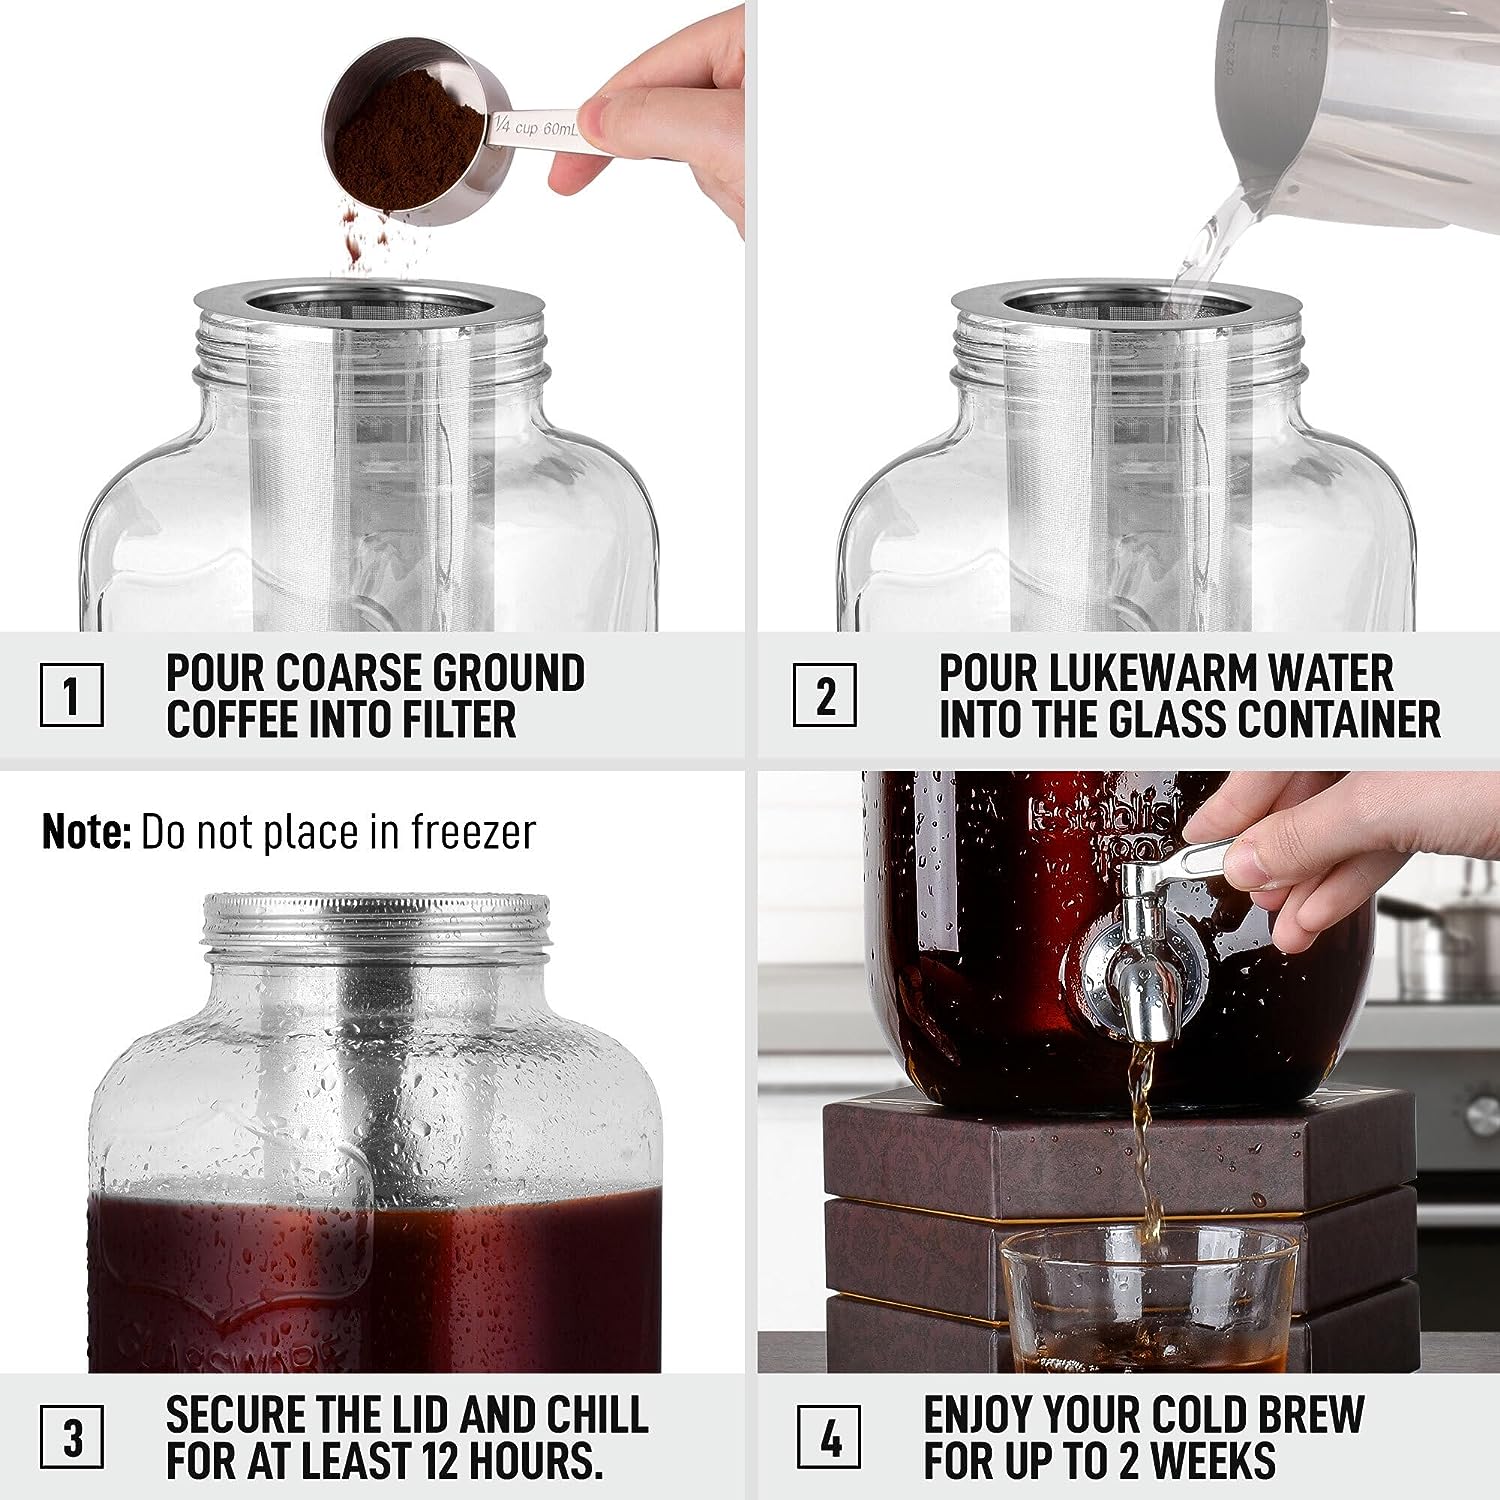 Zulay Kitchen 1 Gallon Cold Brew Coffee Maker with EXTRA-THICK Glass Carafe  & Stainless Steel Mesh Filter - Premium Iced Coffee Maker, Cold Brew